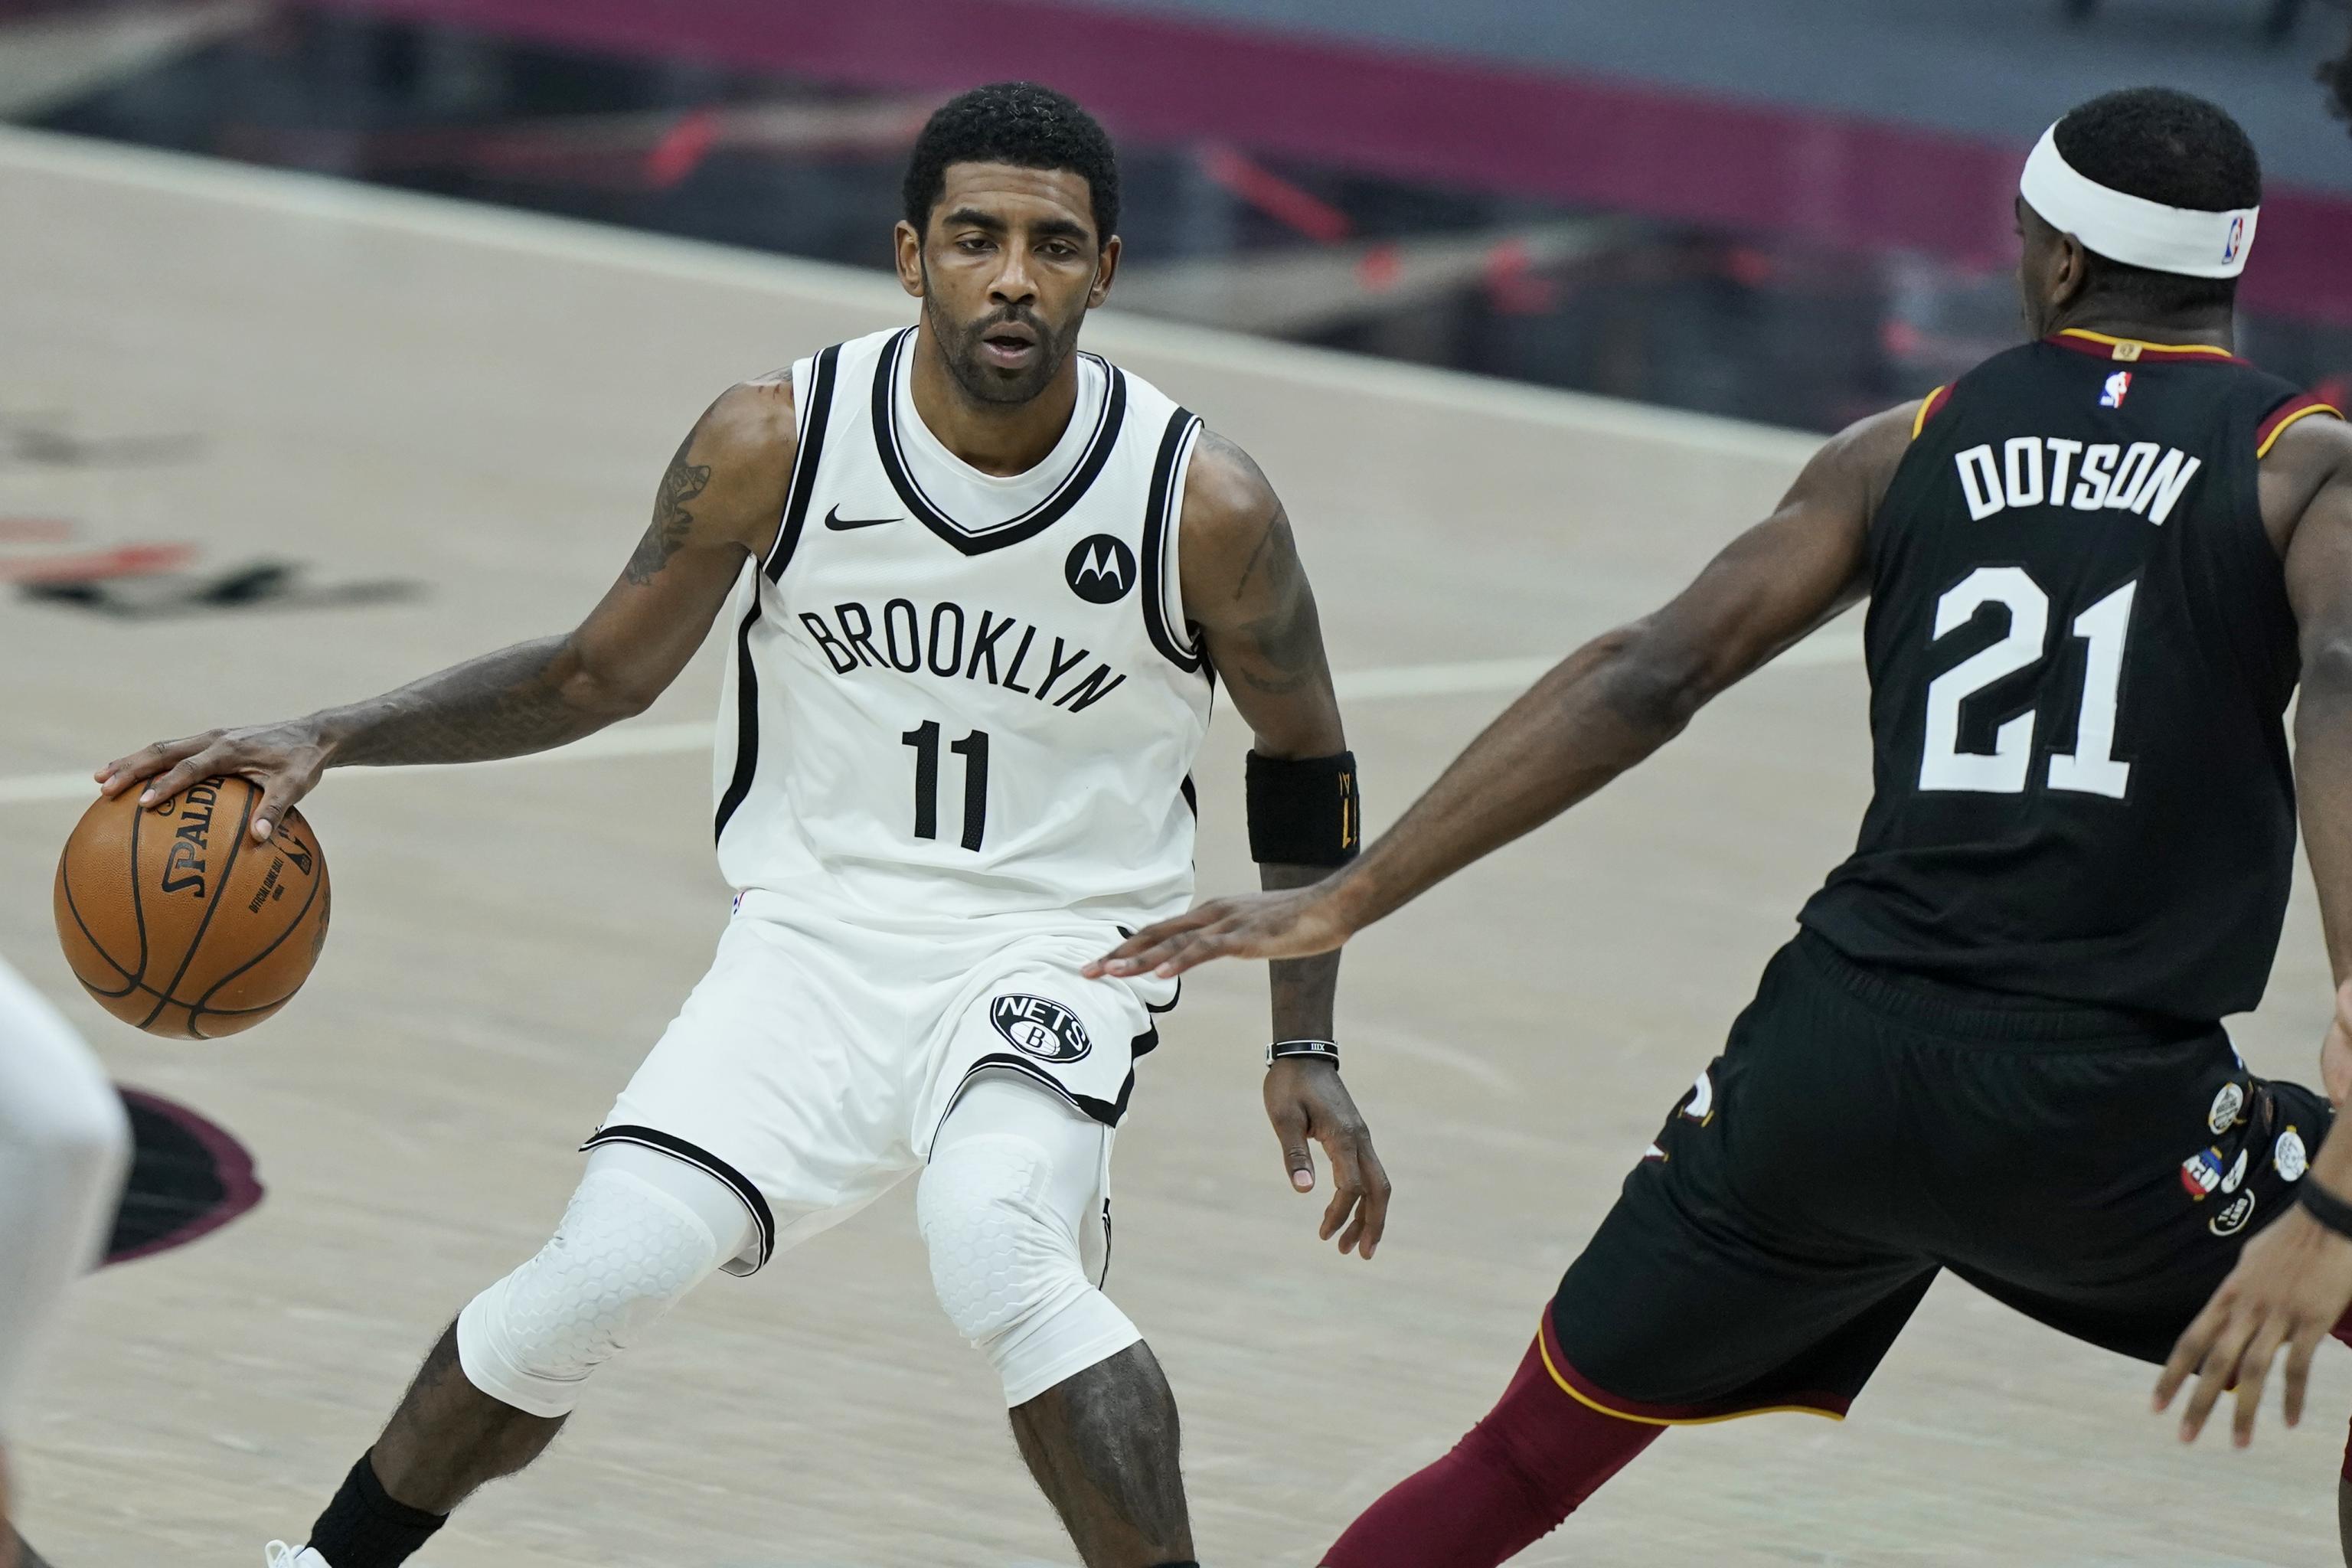 The Brooklyn Nets Have A Big Problem In Their Frontcourt